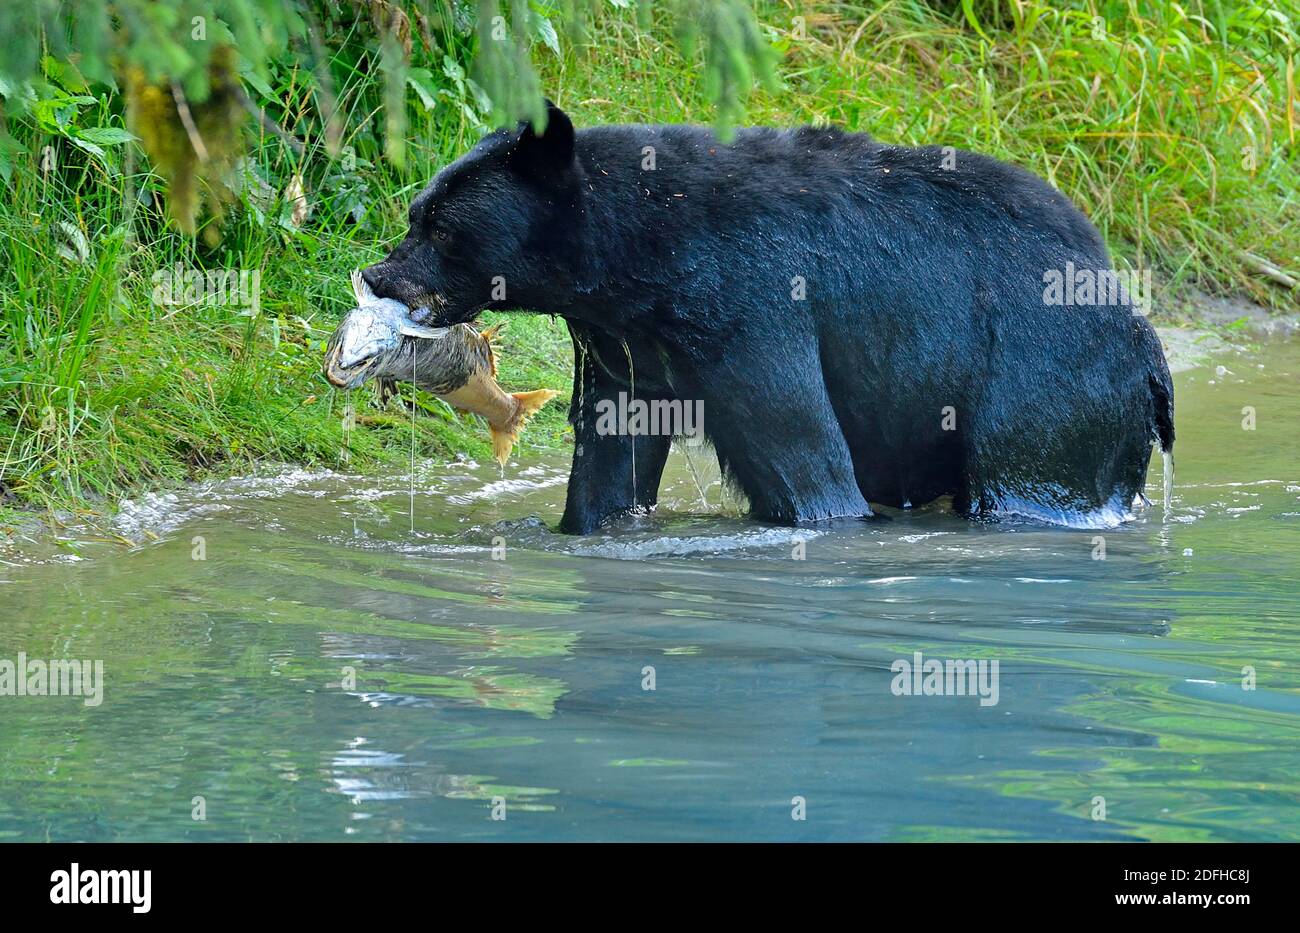 A wild coastal black bear 'Ursus americanus', caring a dead salmon out of the stream to feed on in remote British Columbia Canada. Stock Photo